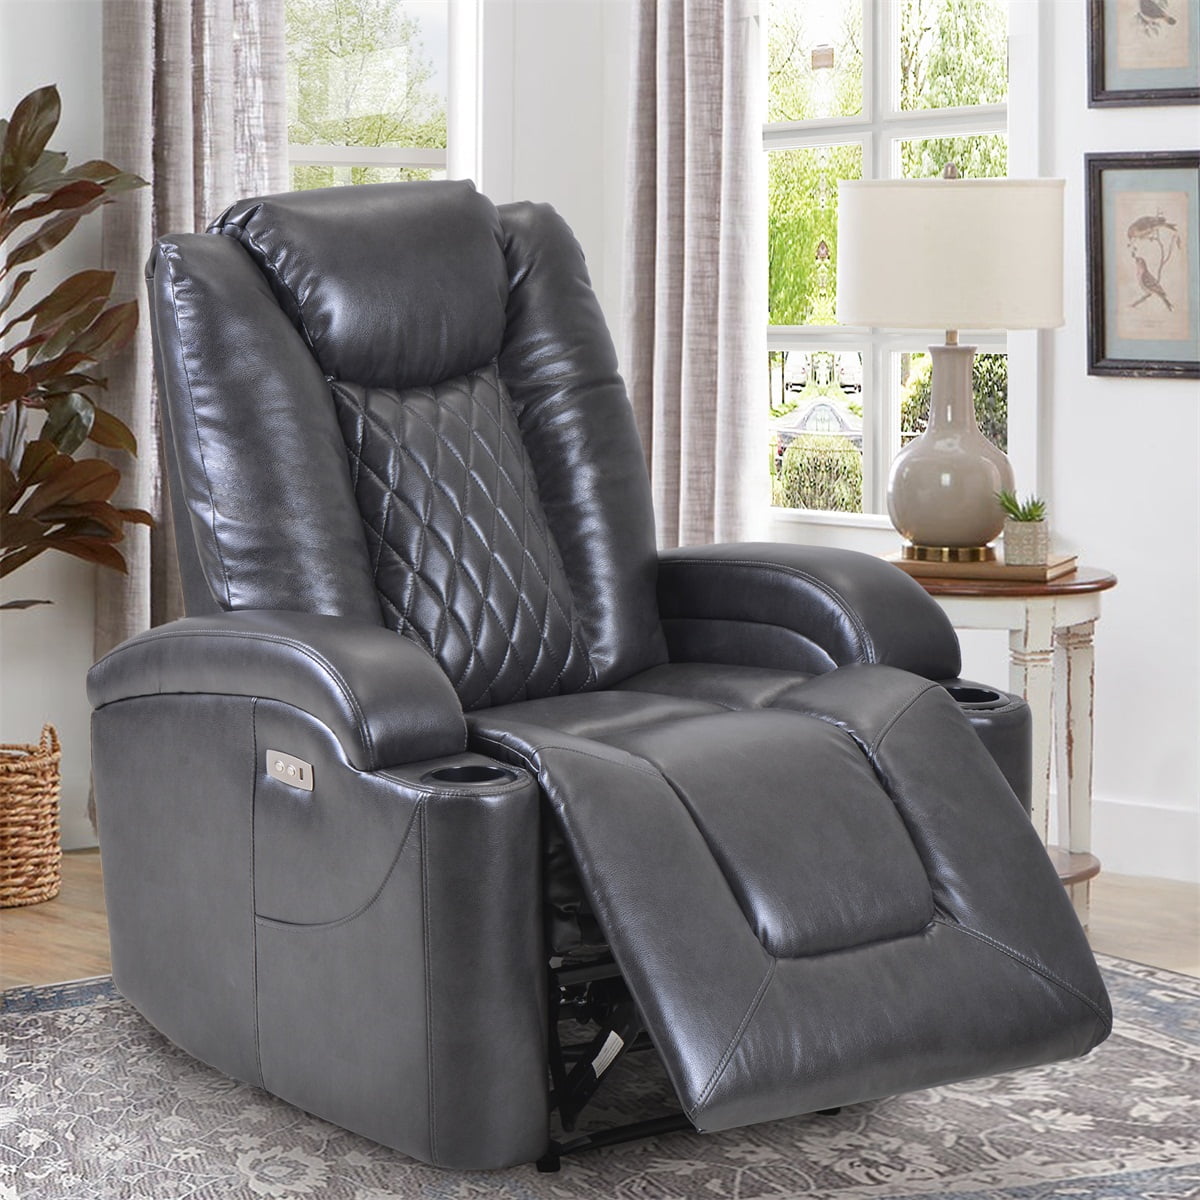 Power Motion Recliner Electric Lift Chair with Cup Holder,Soft Fabric